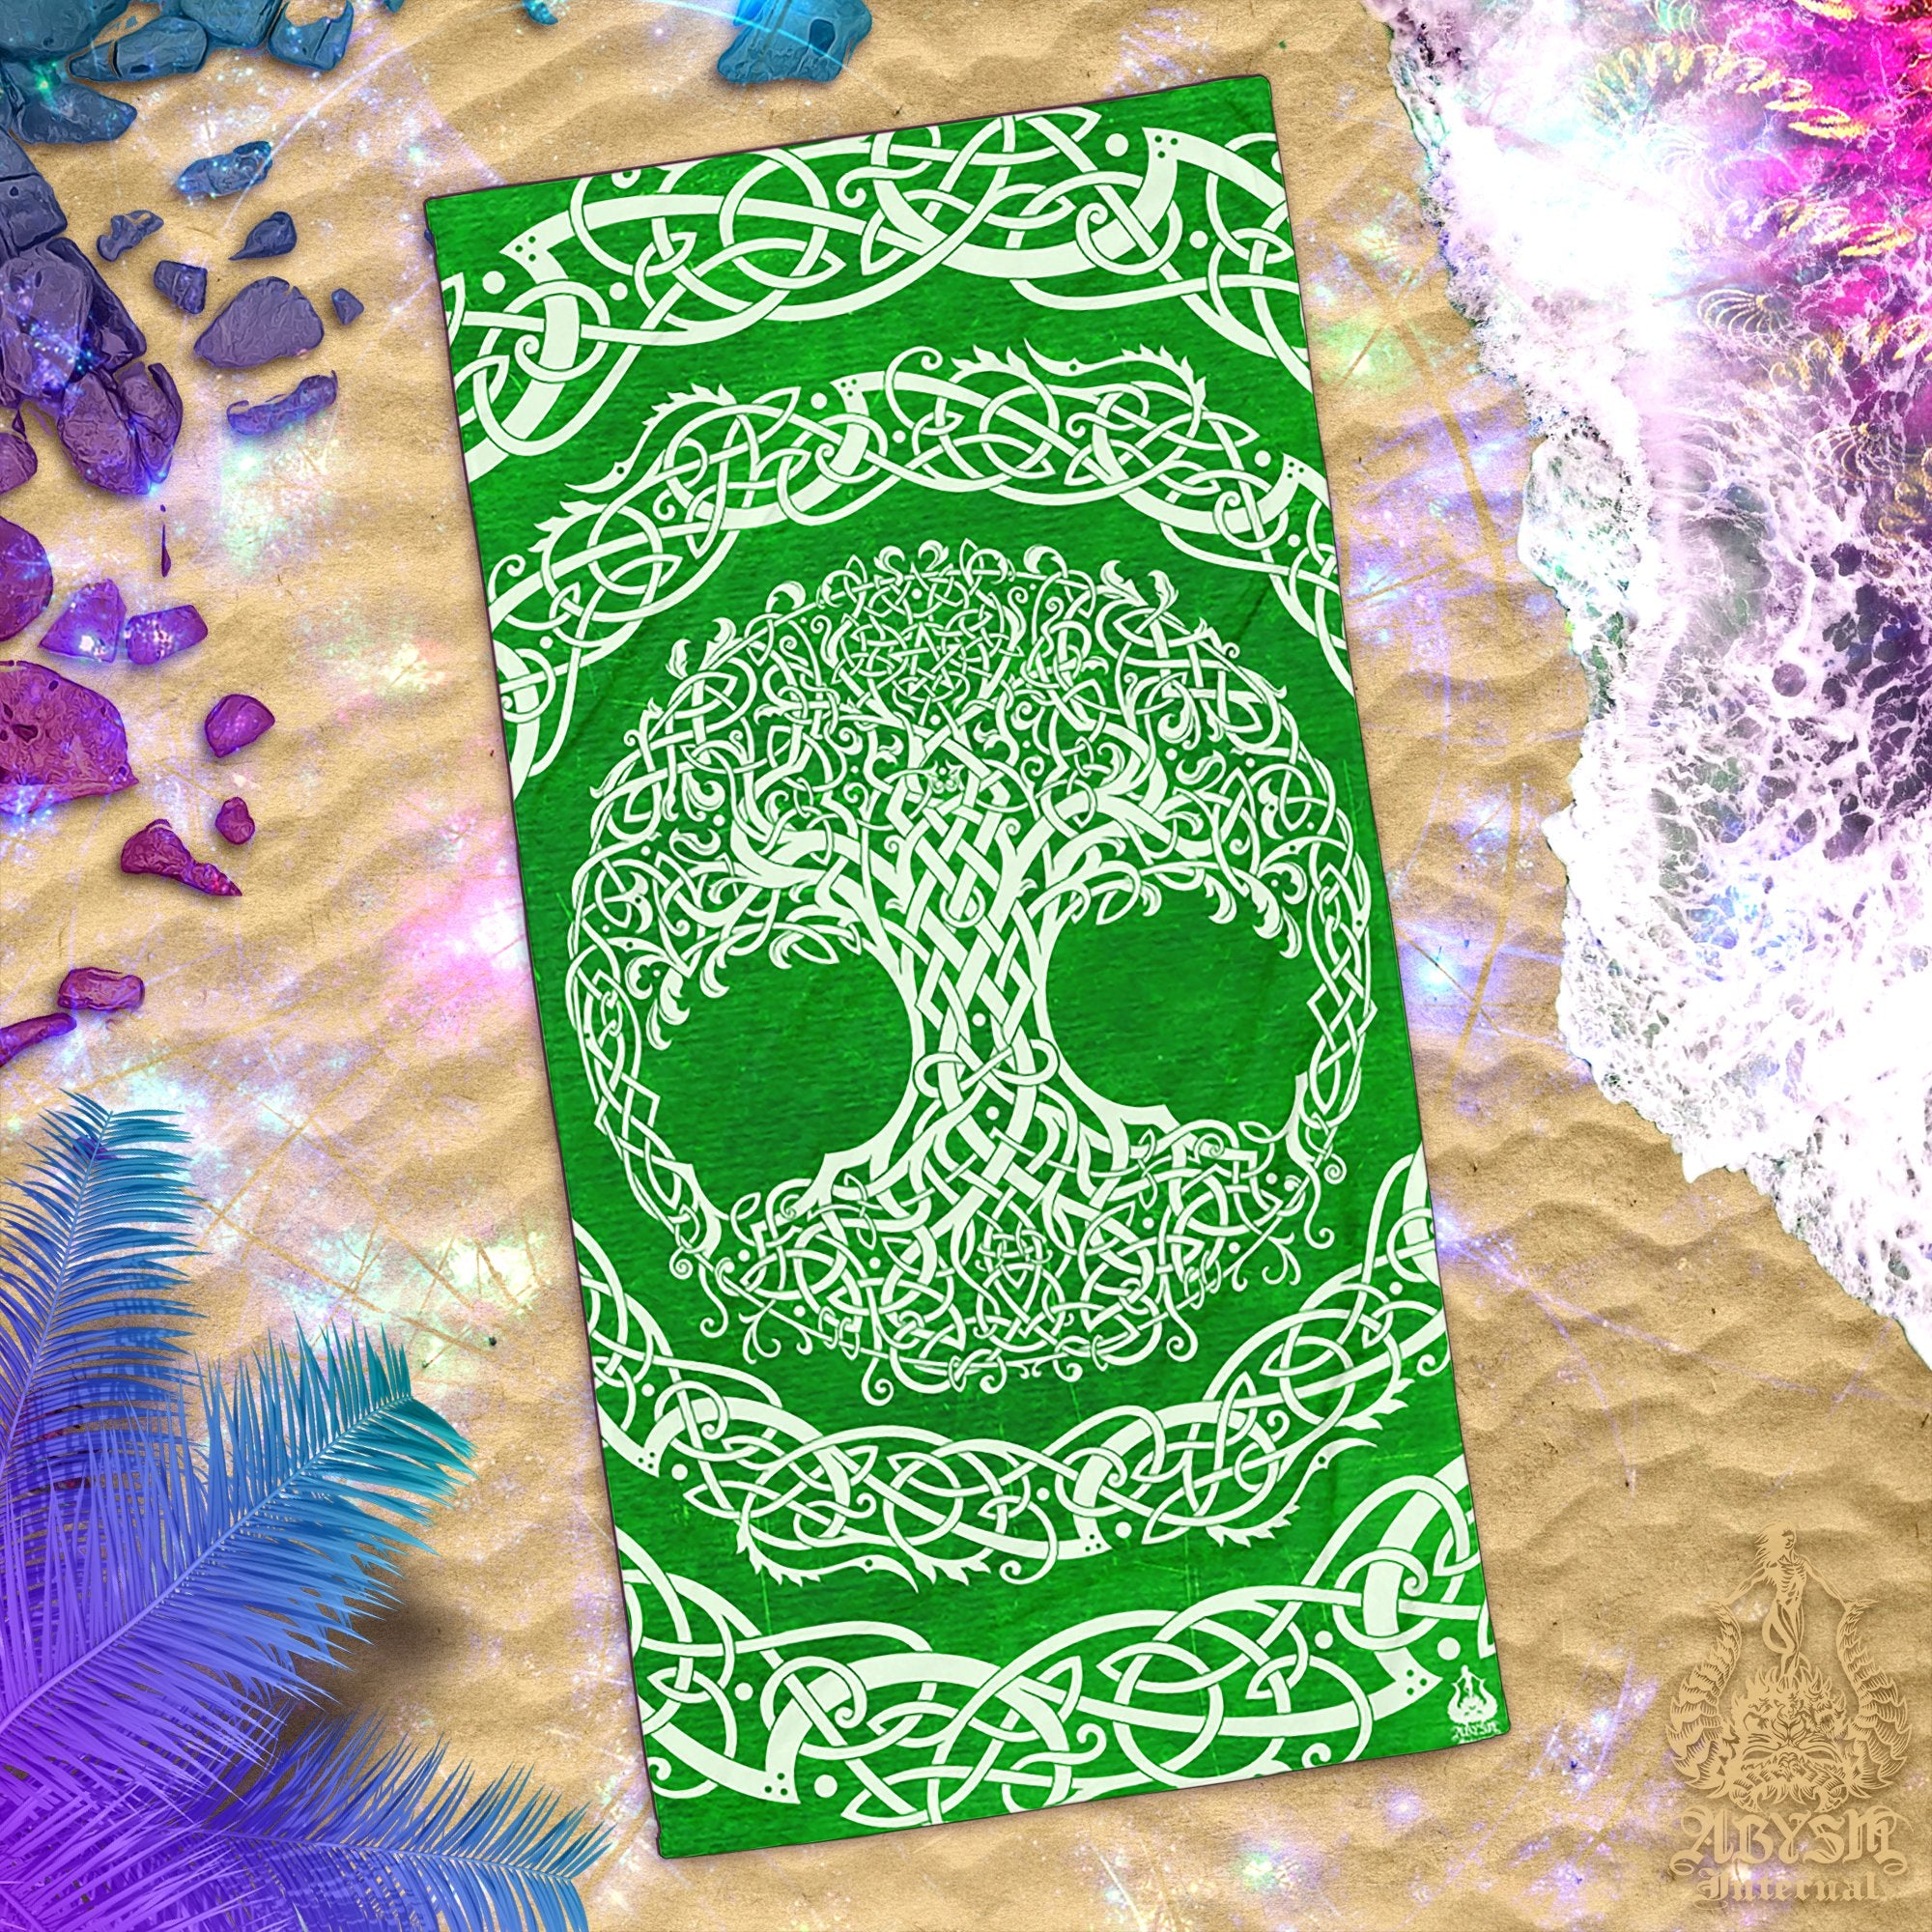 ALL Tree of Life Beach Towel Designs, Celtic Knots, Witch and Pagan Art - Cyan Blue & Gold, Cream, White, Psy, 12 Colors - Abysm Internal